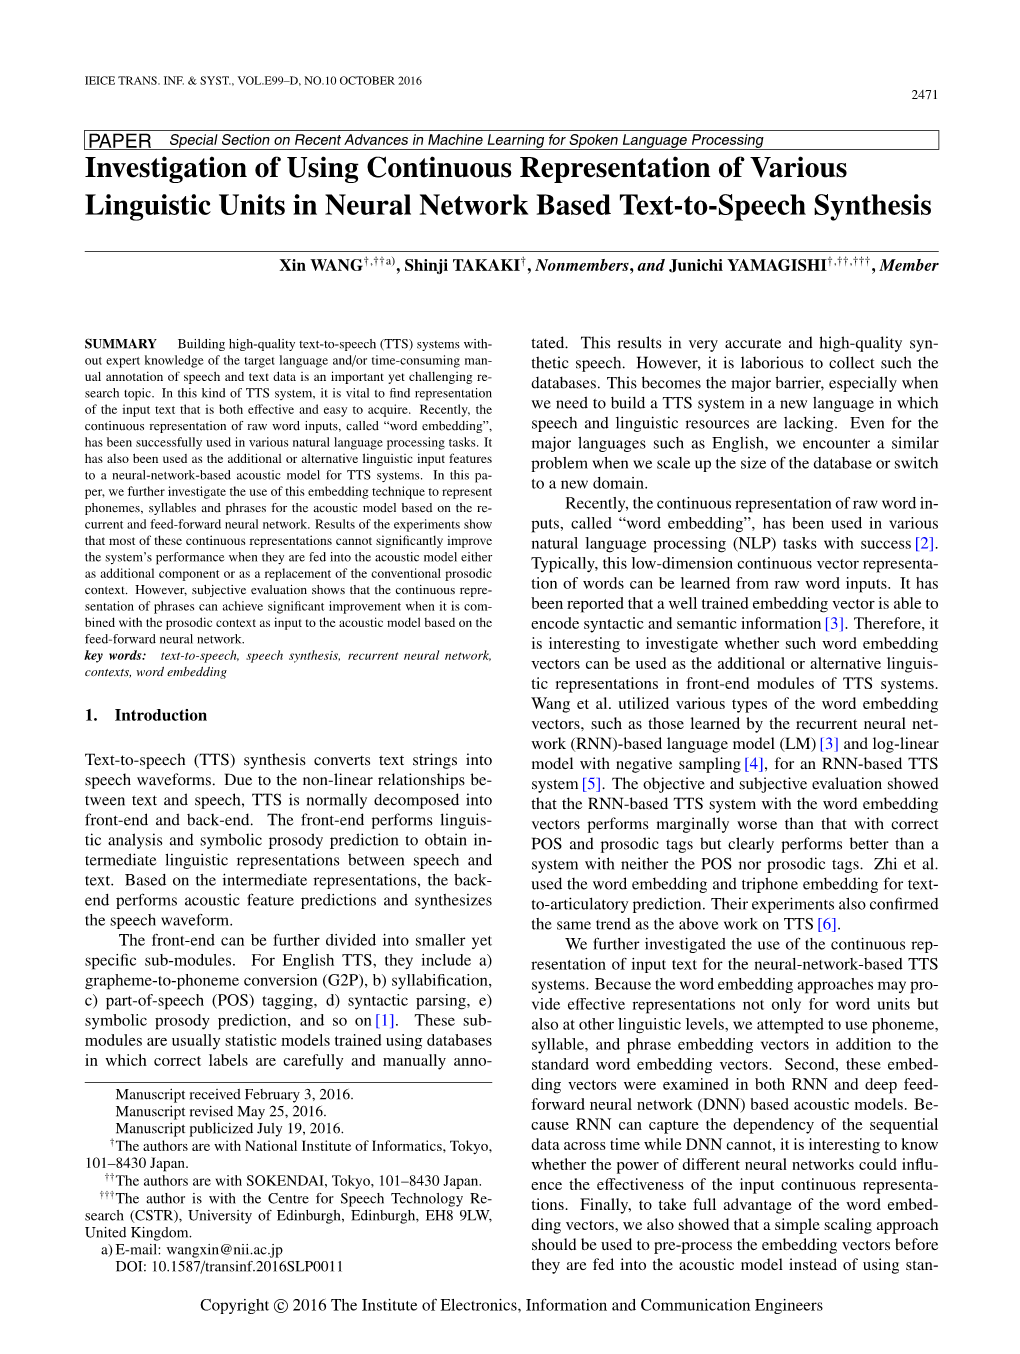 Investigation of Using Continuous Representation of Various Linguistic Units in Neural Network Based Text-To-Speech Synthesis